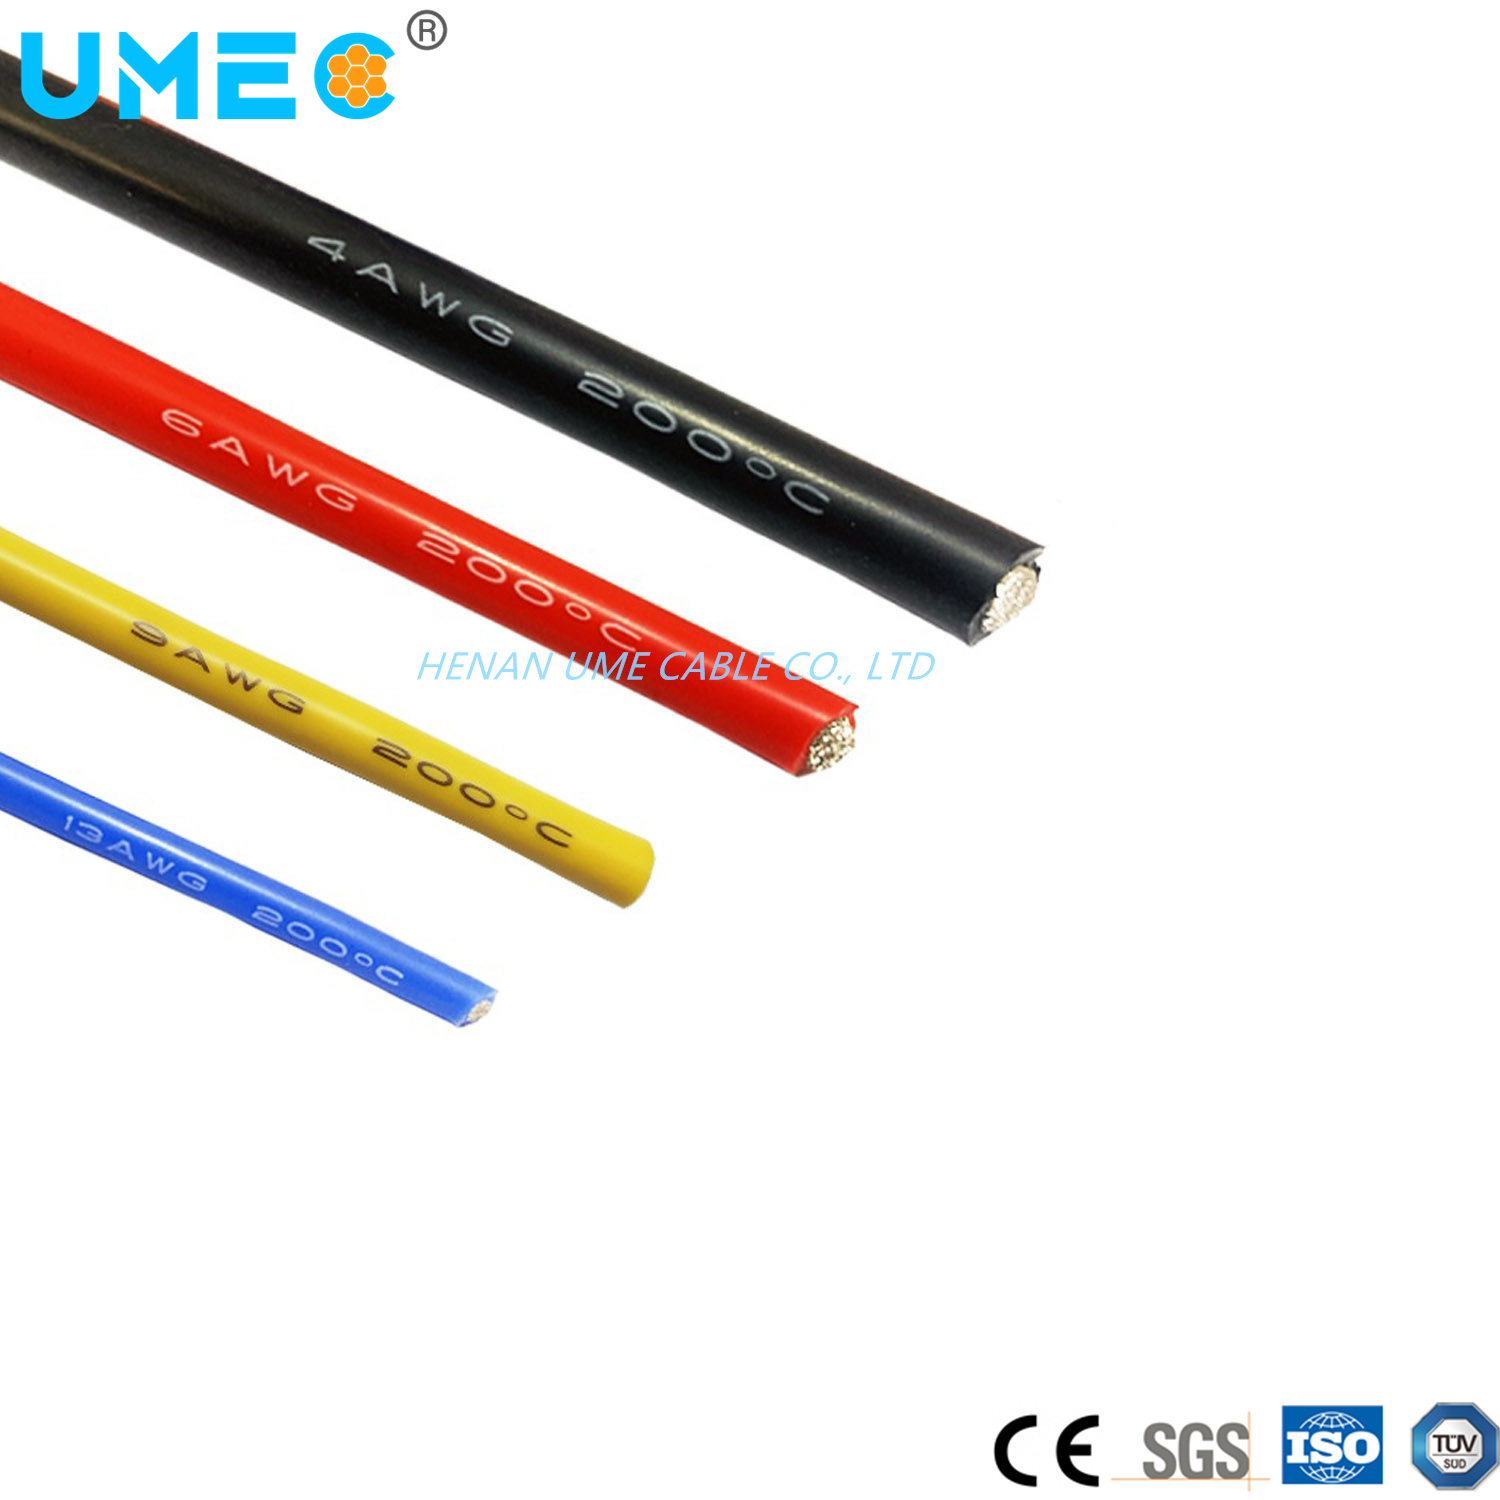 
                300/500V 200 Degree Silicone Cable Sif Sif/Gl Copper Bare or Tinned Silicon Rubber Extruded Cable and Wire
            